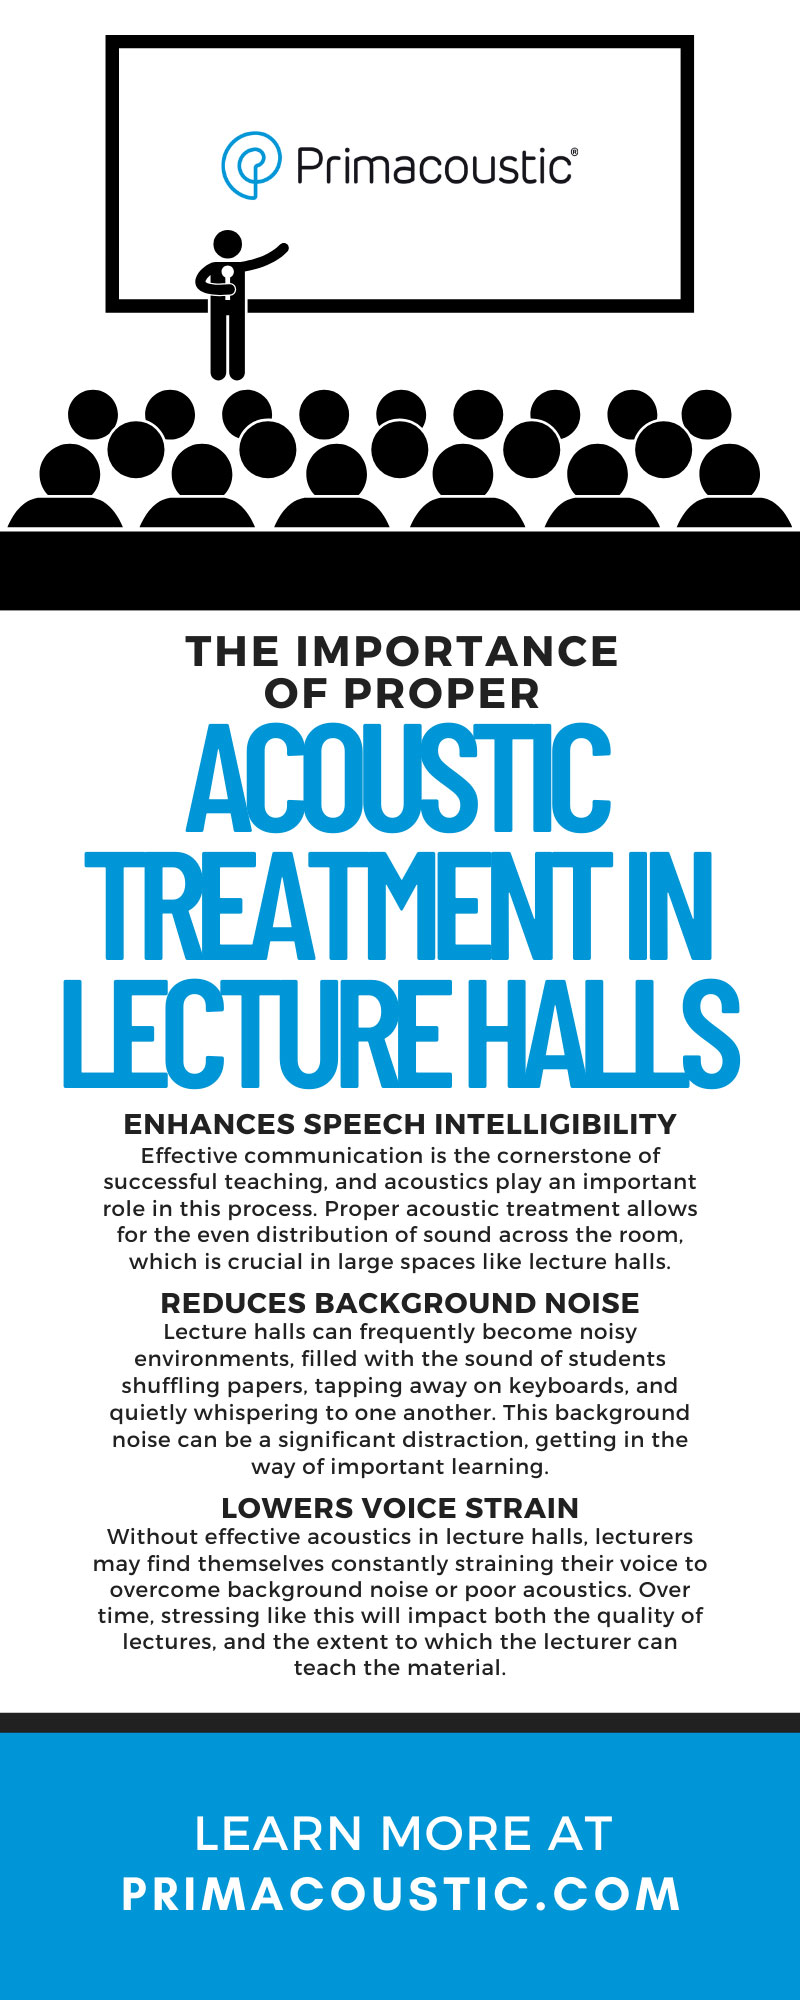 The Importance of Proper Acoustic Treatment in Lecture Halls